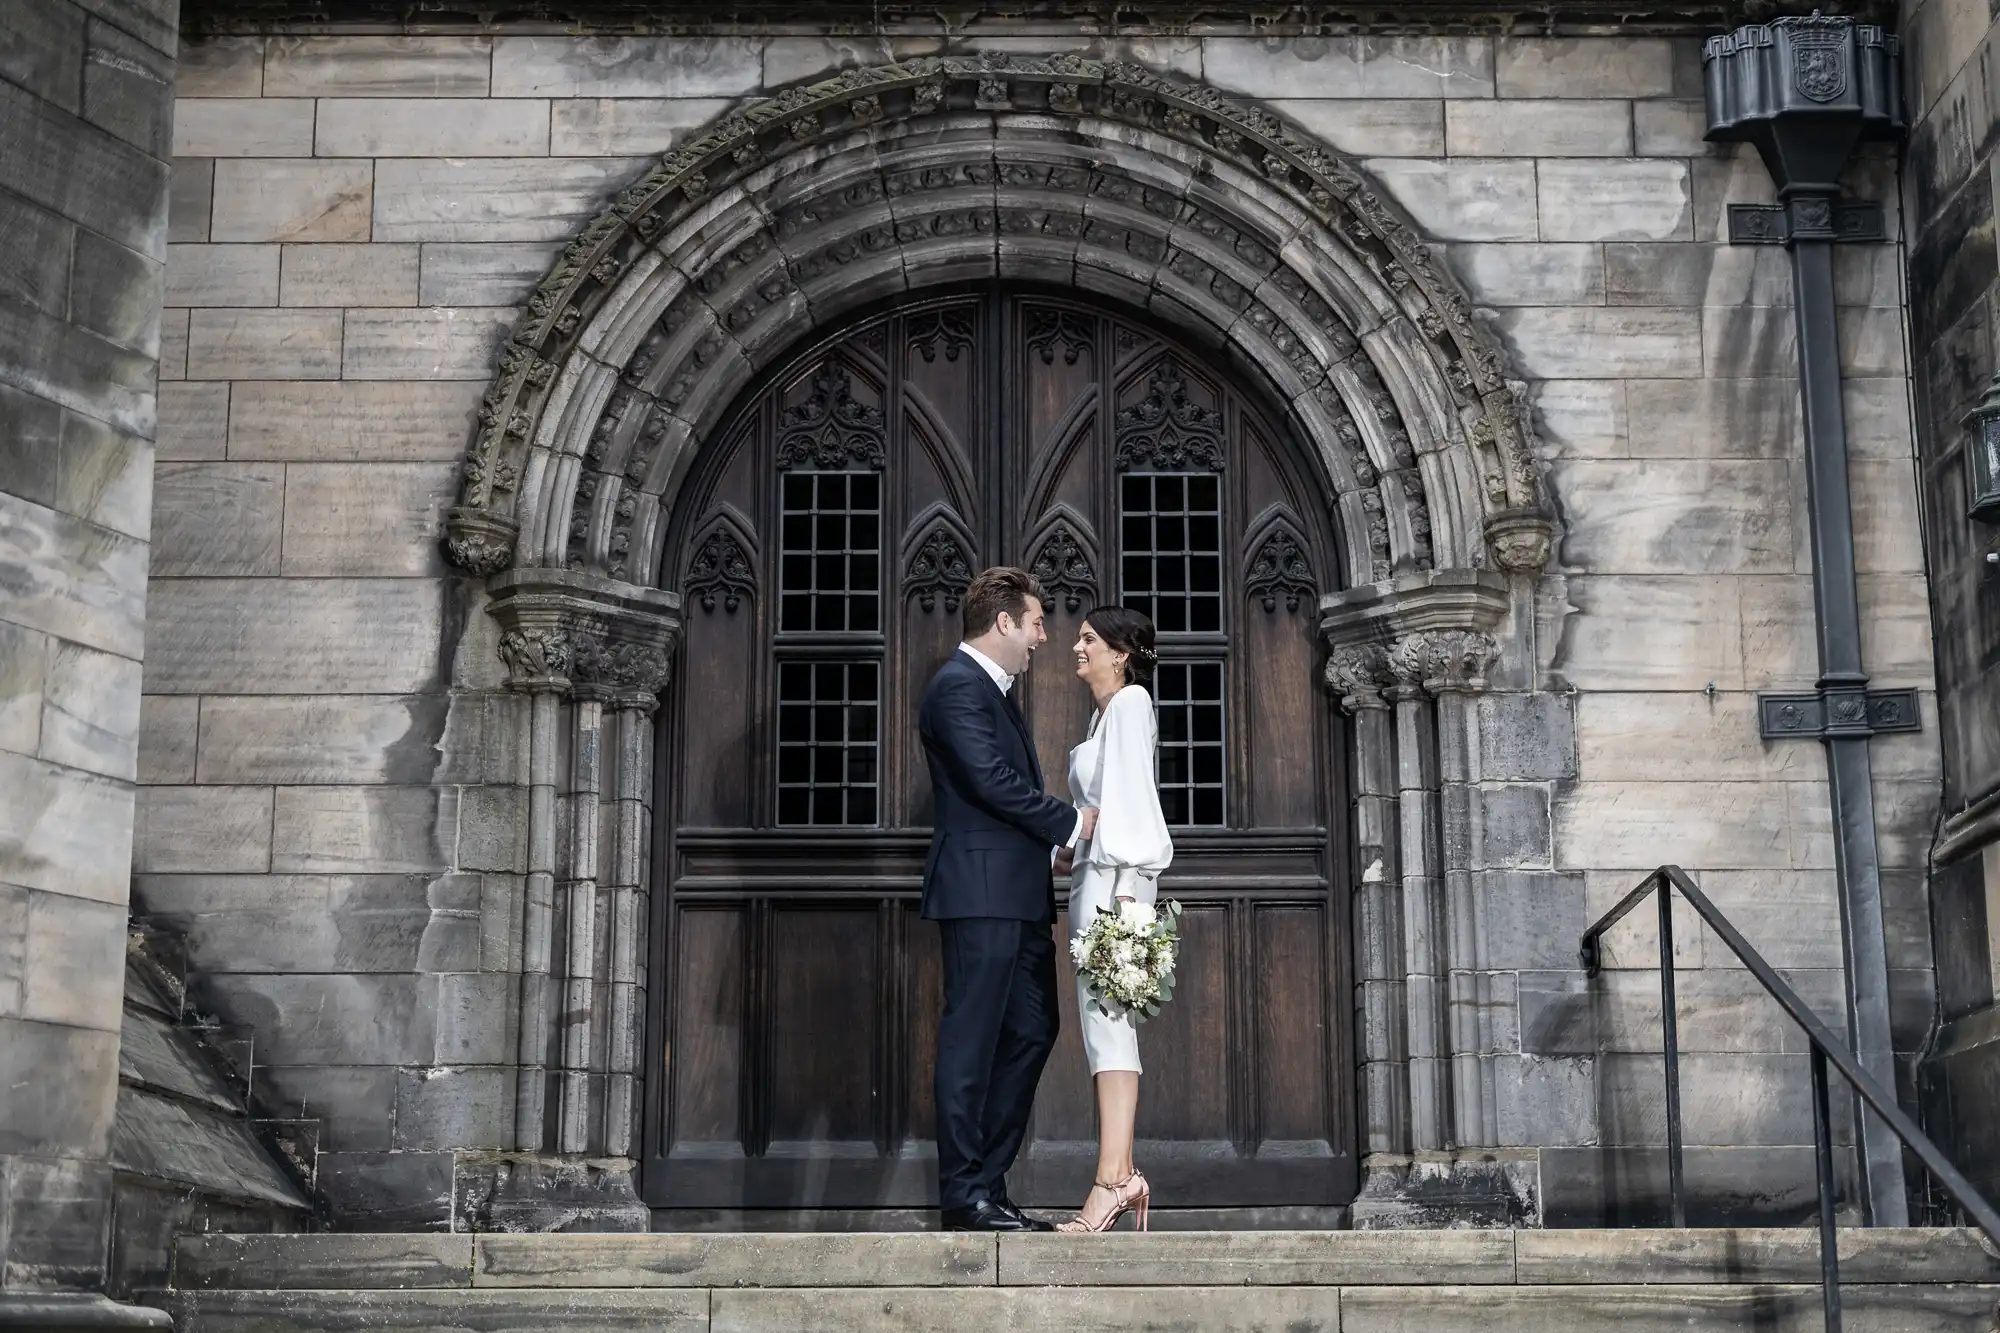 A couple kissing on steps in front of a church's ornate gothic doorway, the bride holding a bouquet and the groom in a suit.